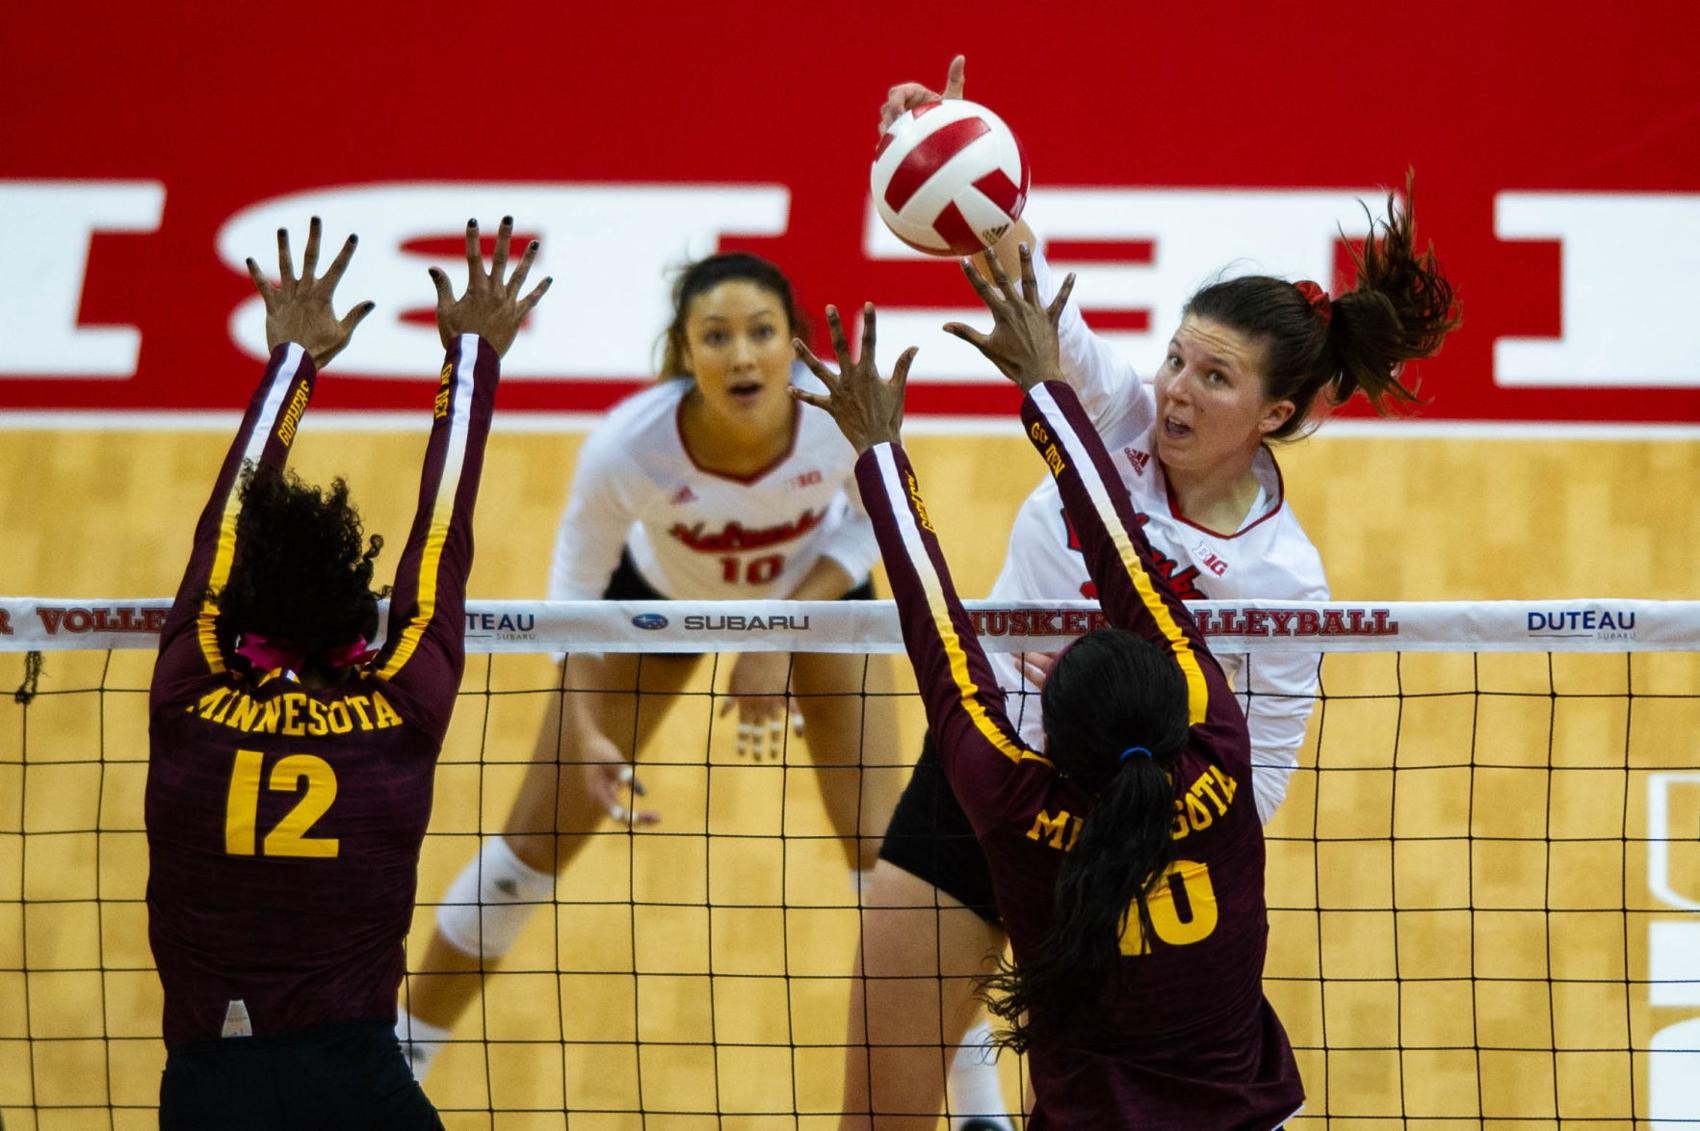 Foecke, Hames earn Big Ten Conference volleyball awards